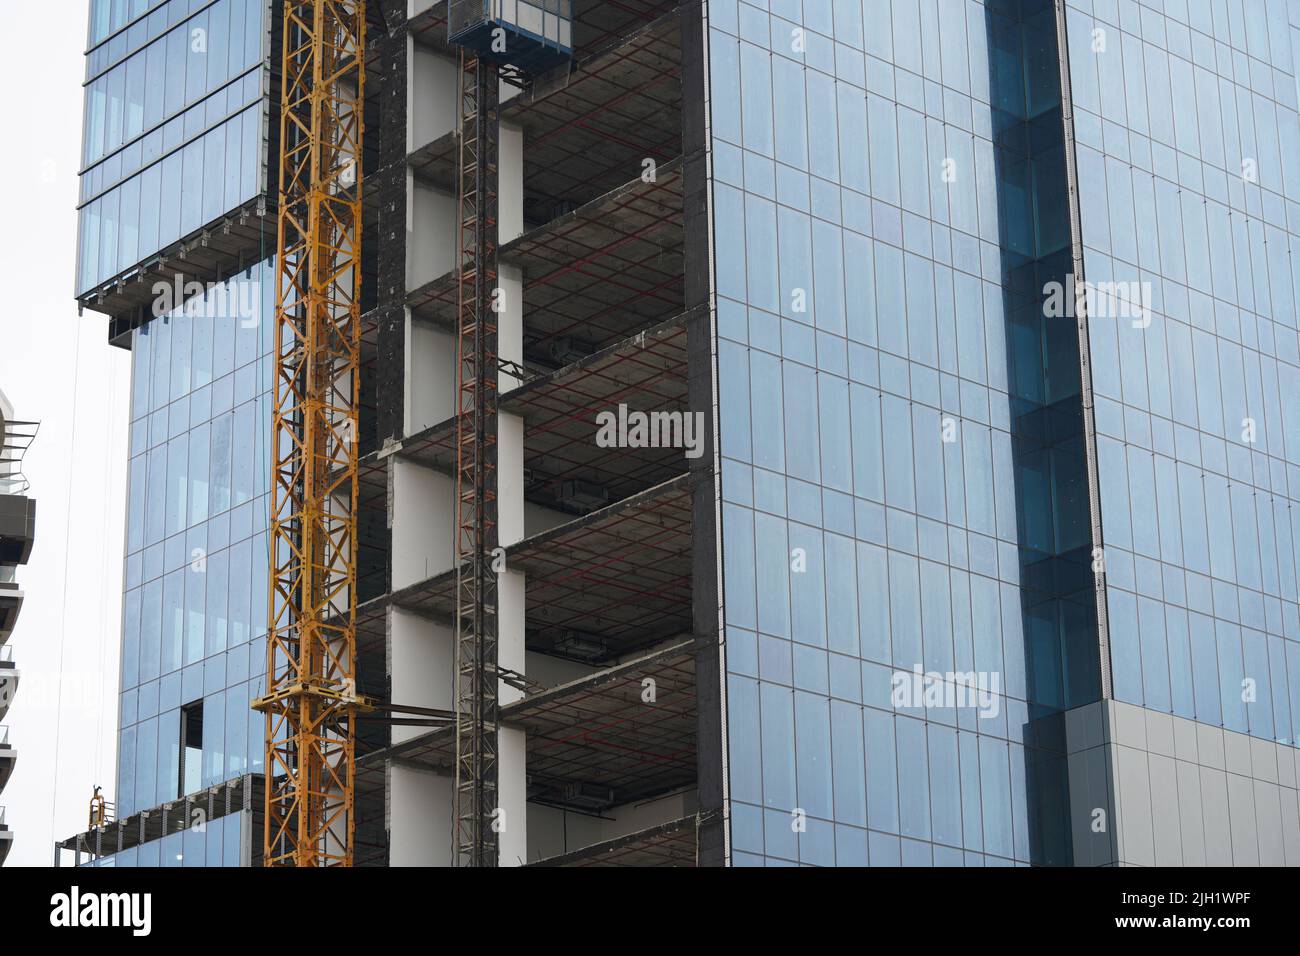 a huge building, lots of tower Construction sites with cranes and buildings, Khobar, Saudi Arabia, December 31, 2021. Stock Photo